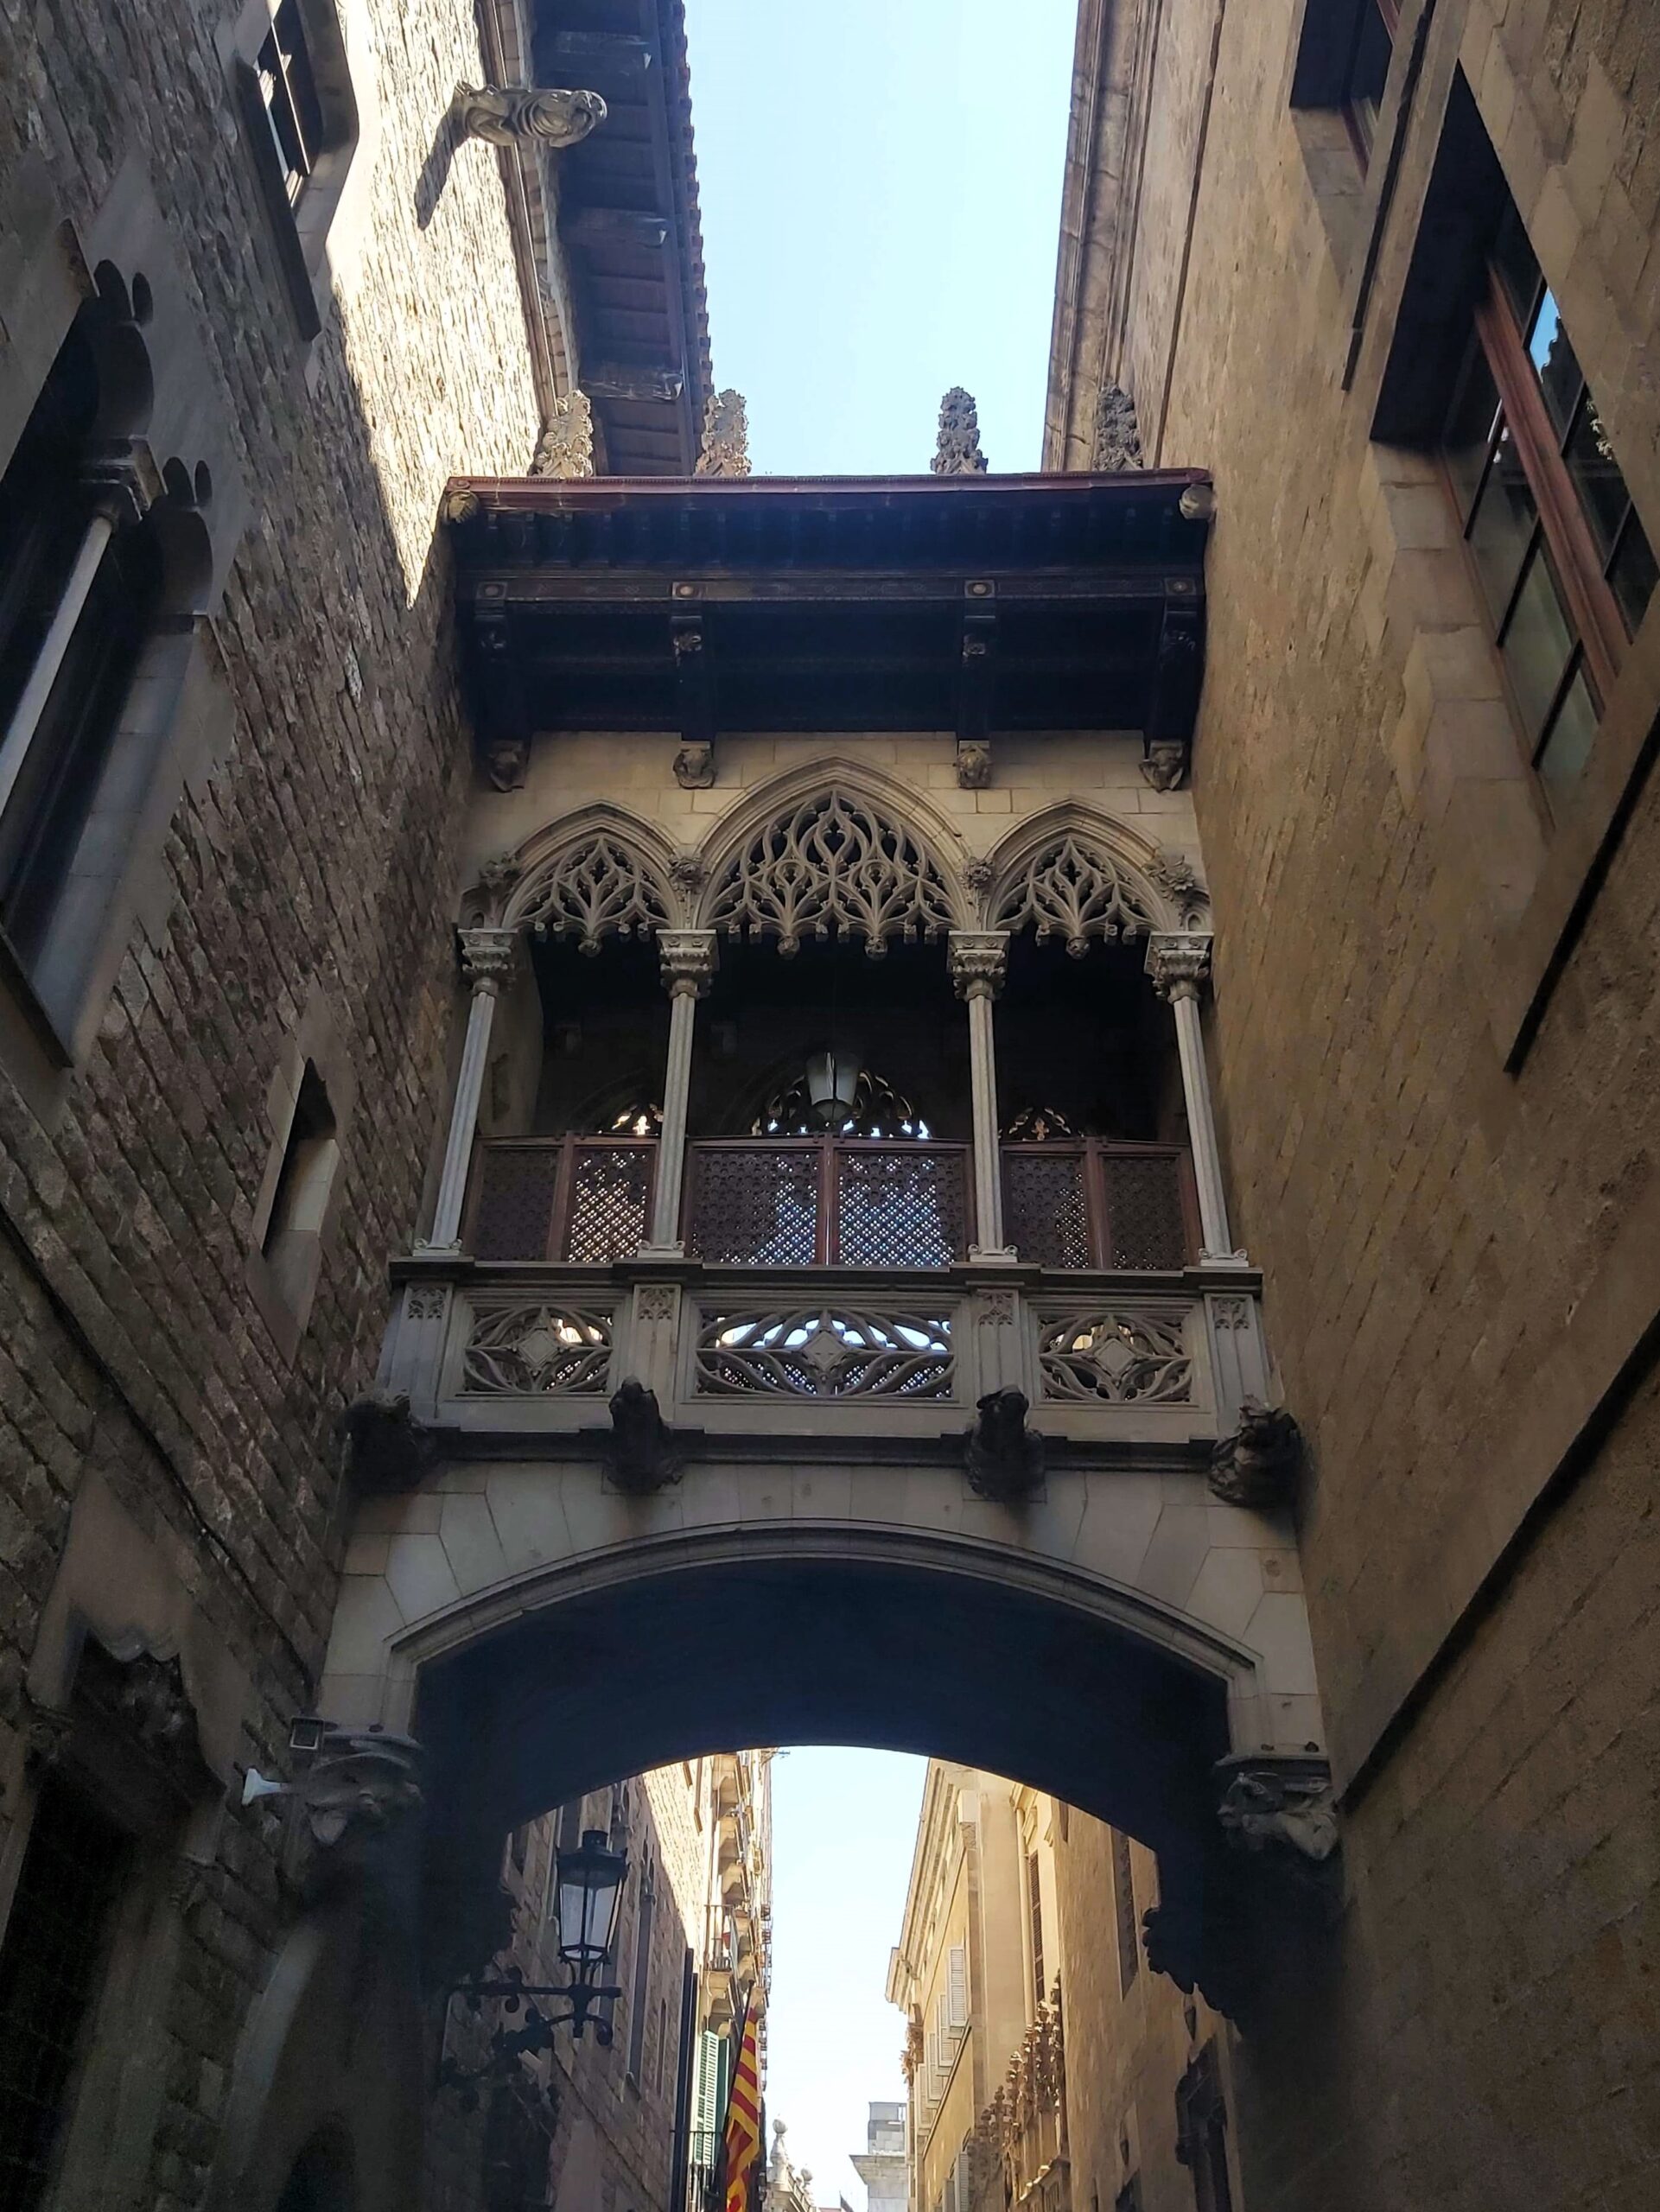 An old passage way joining two buildings in Barcelona, Spain